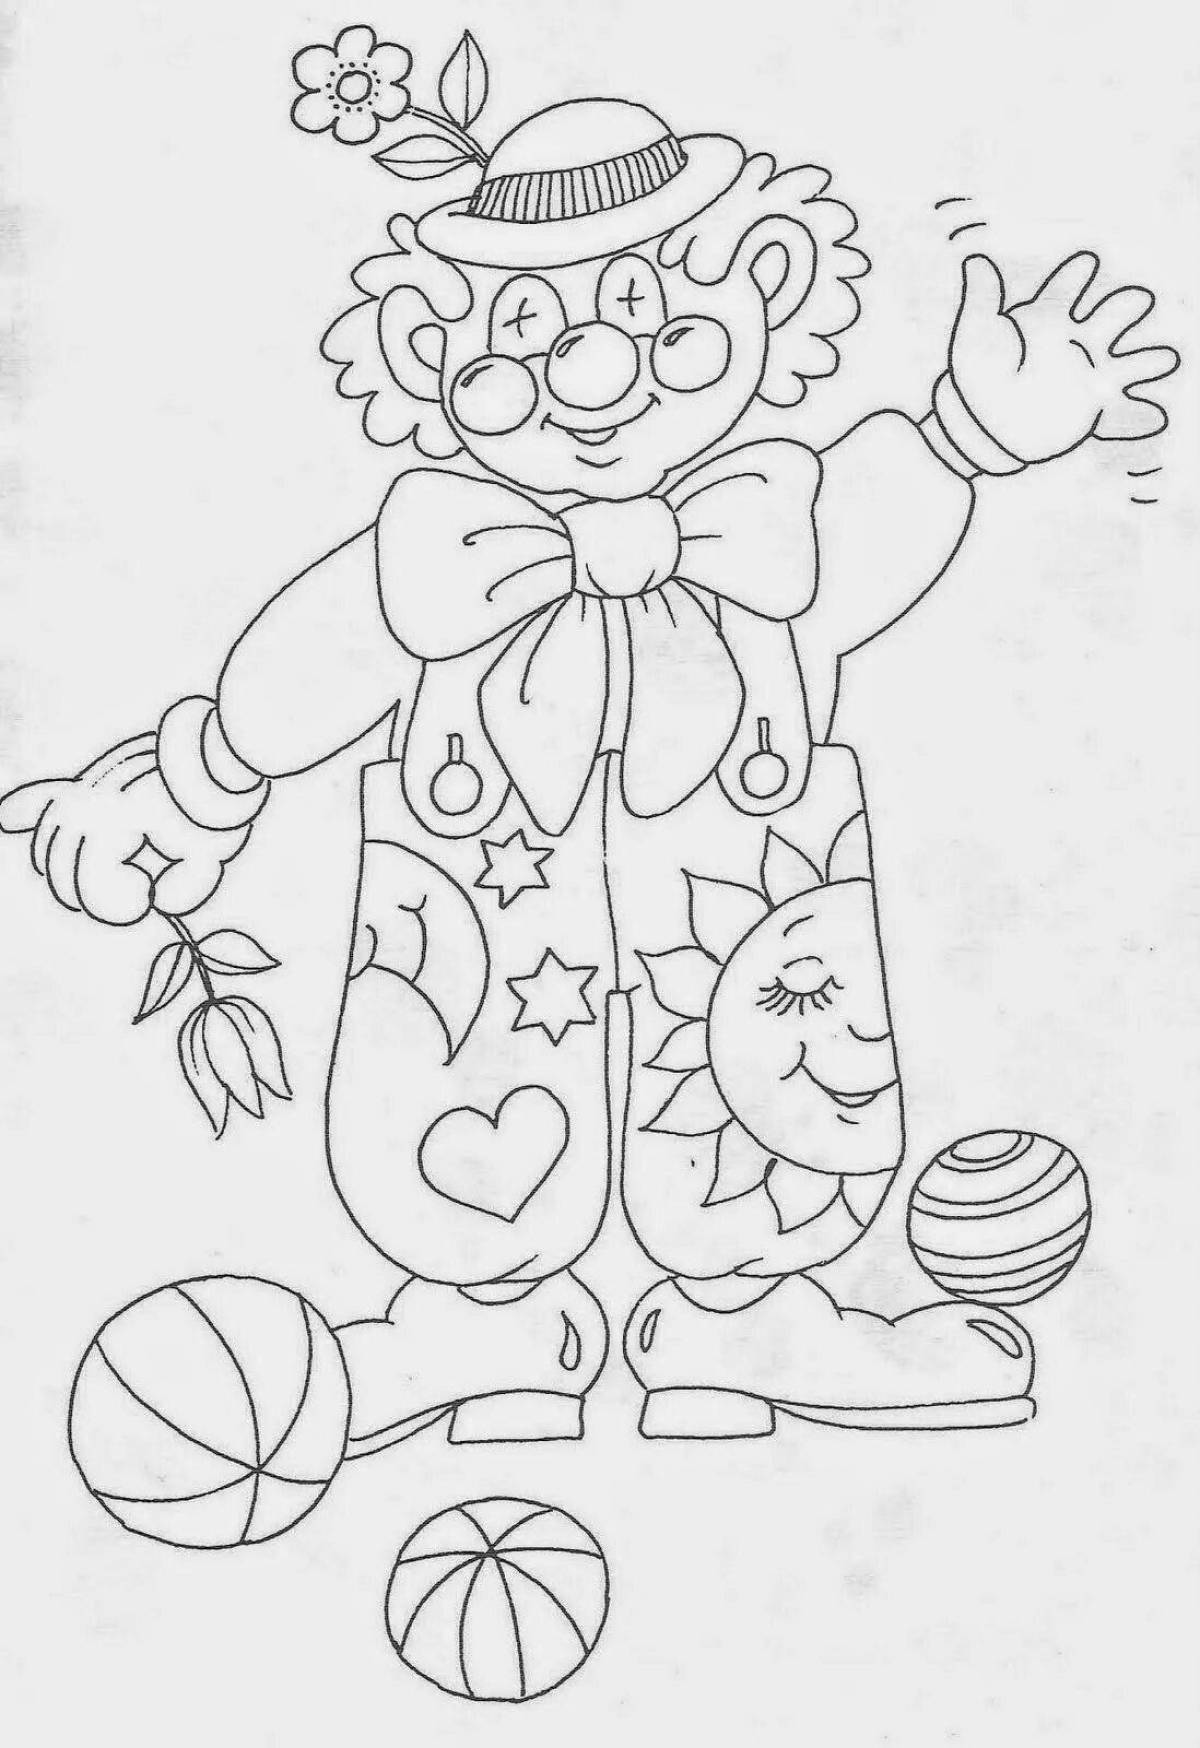 Live clown coloring book for kids